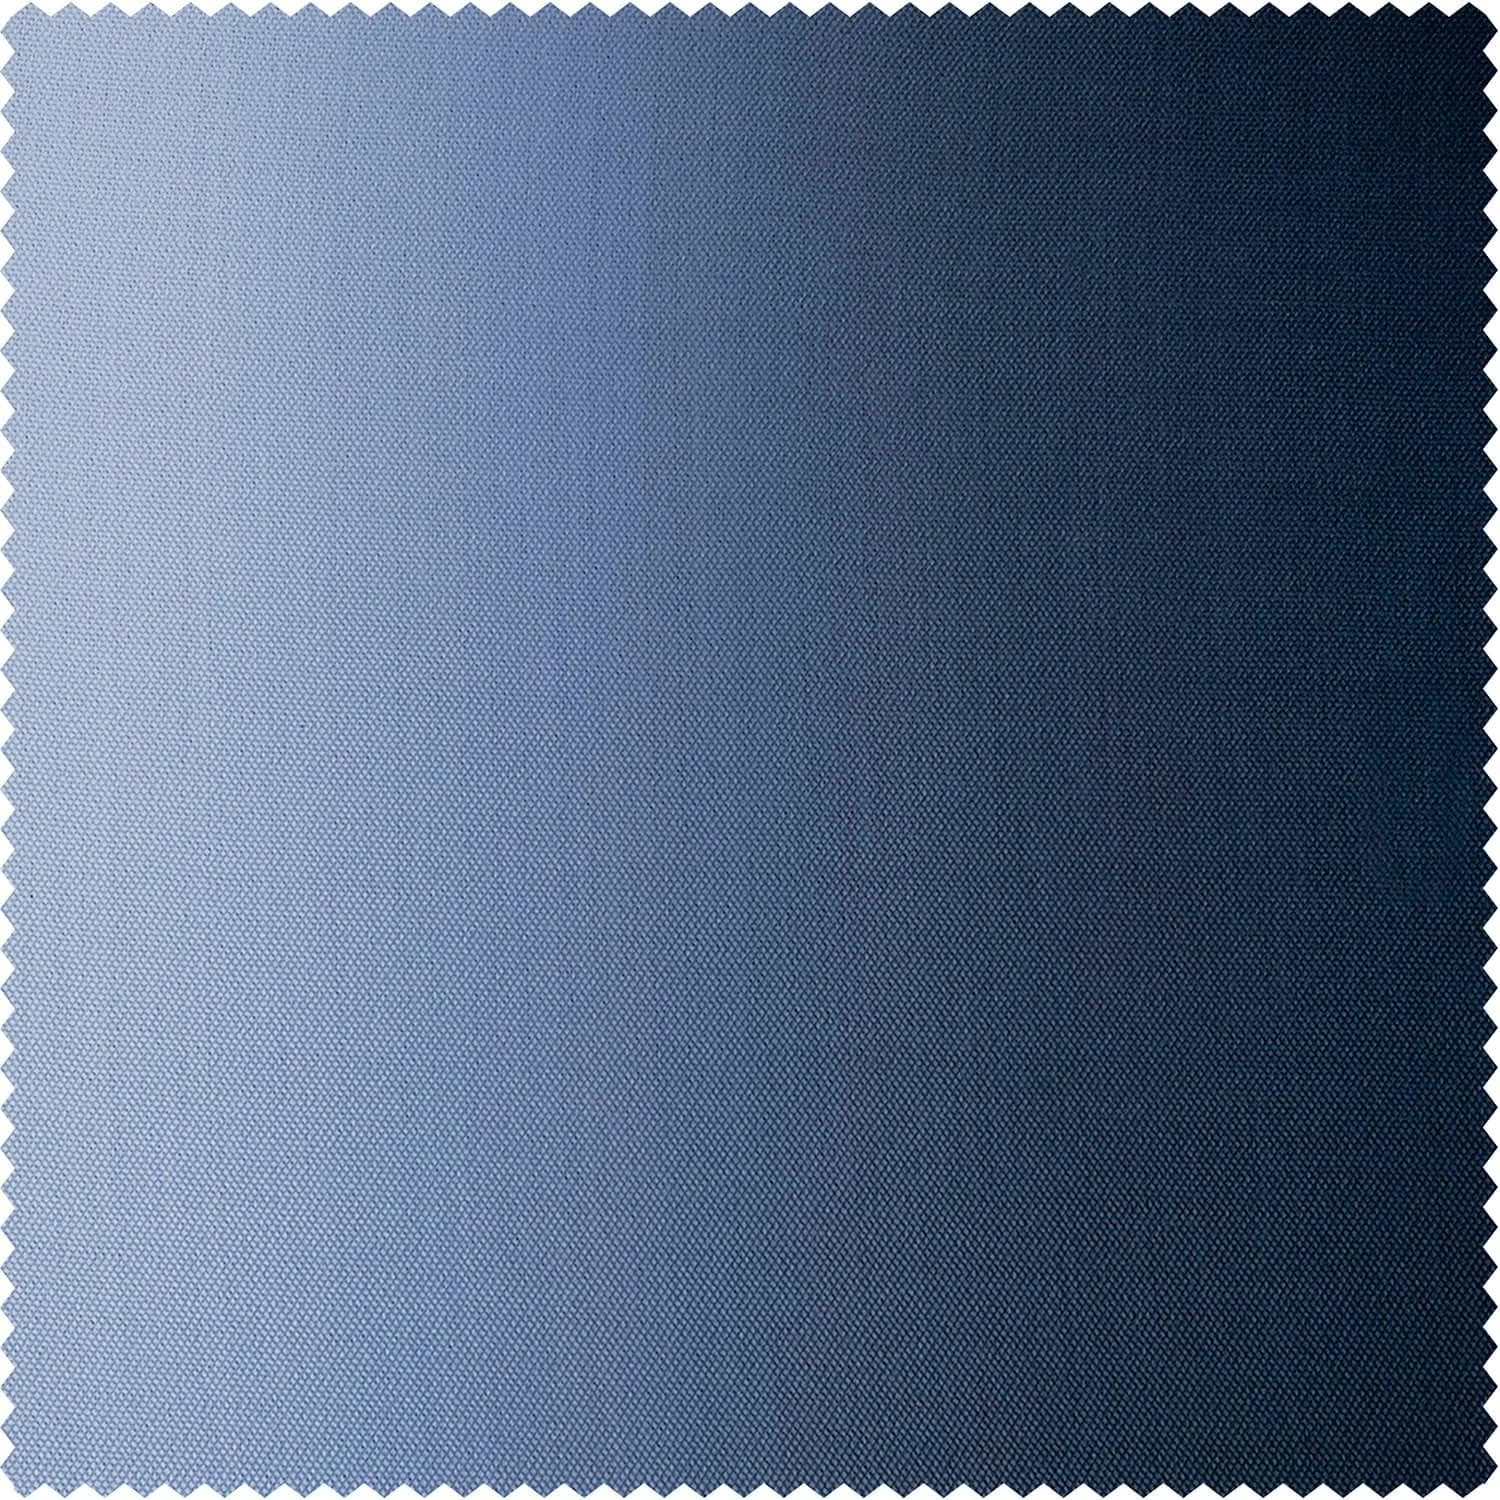 Parallel Blue Printed Faux Linen Swatch